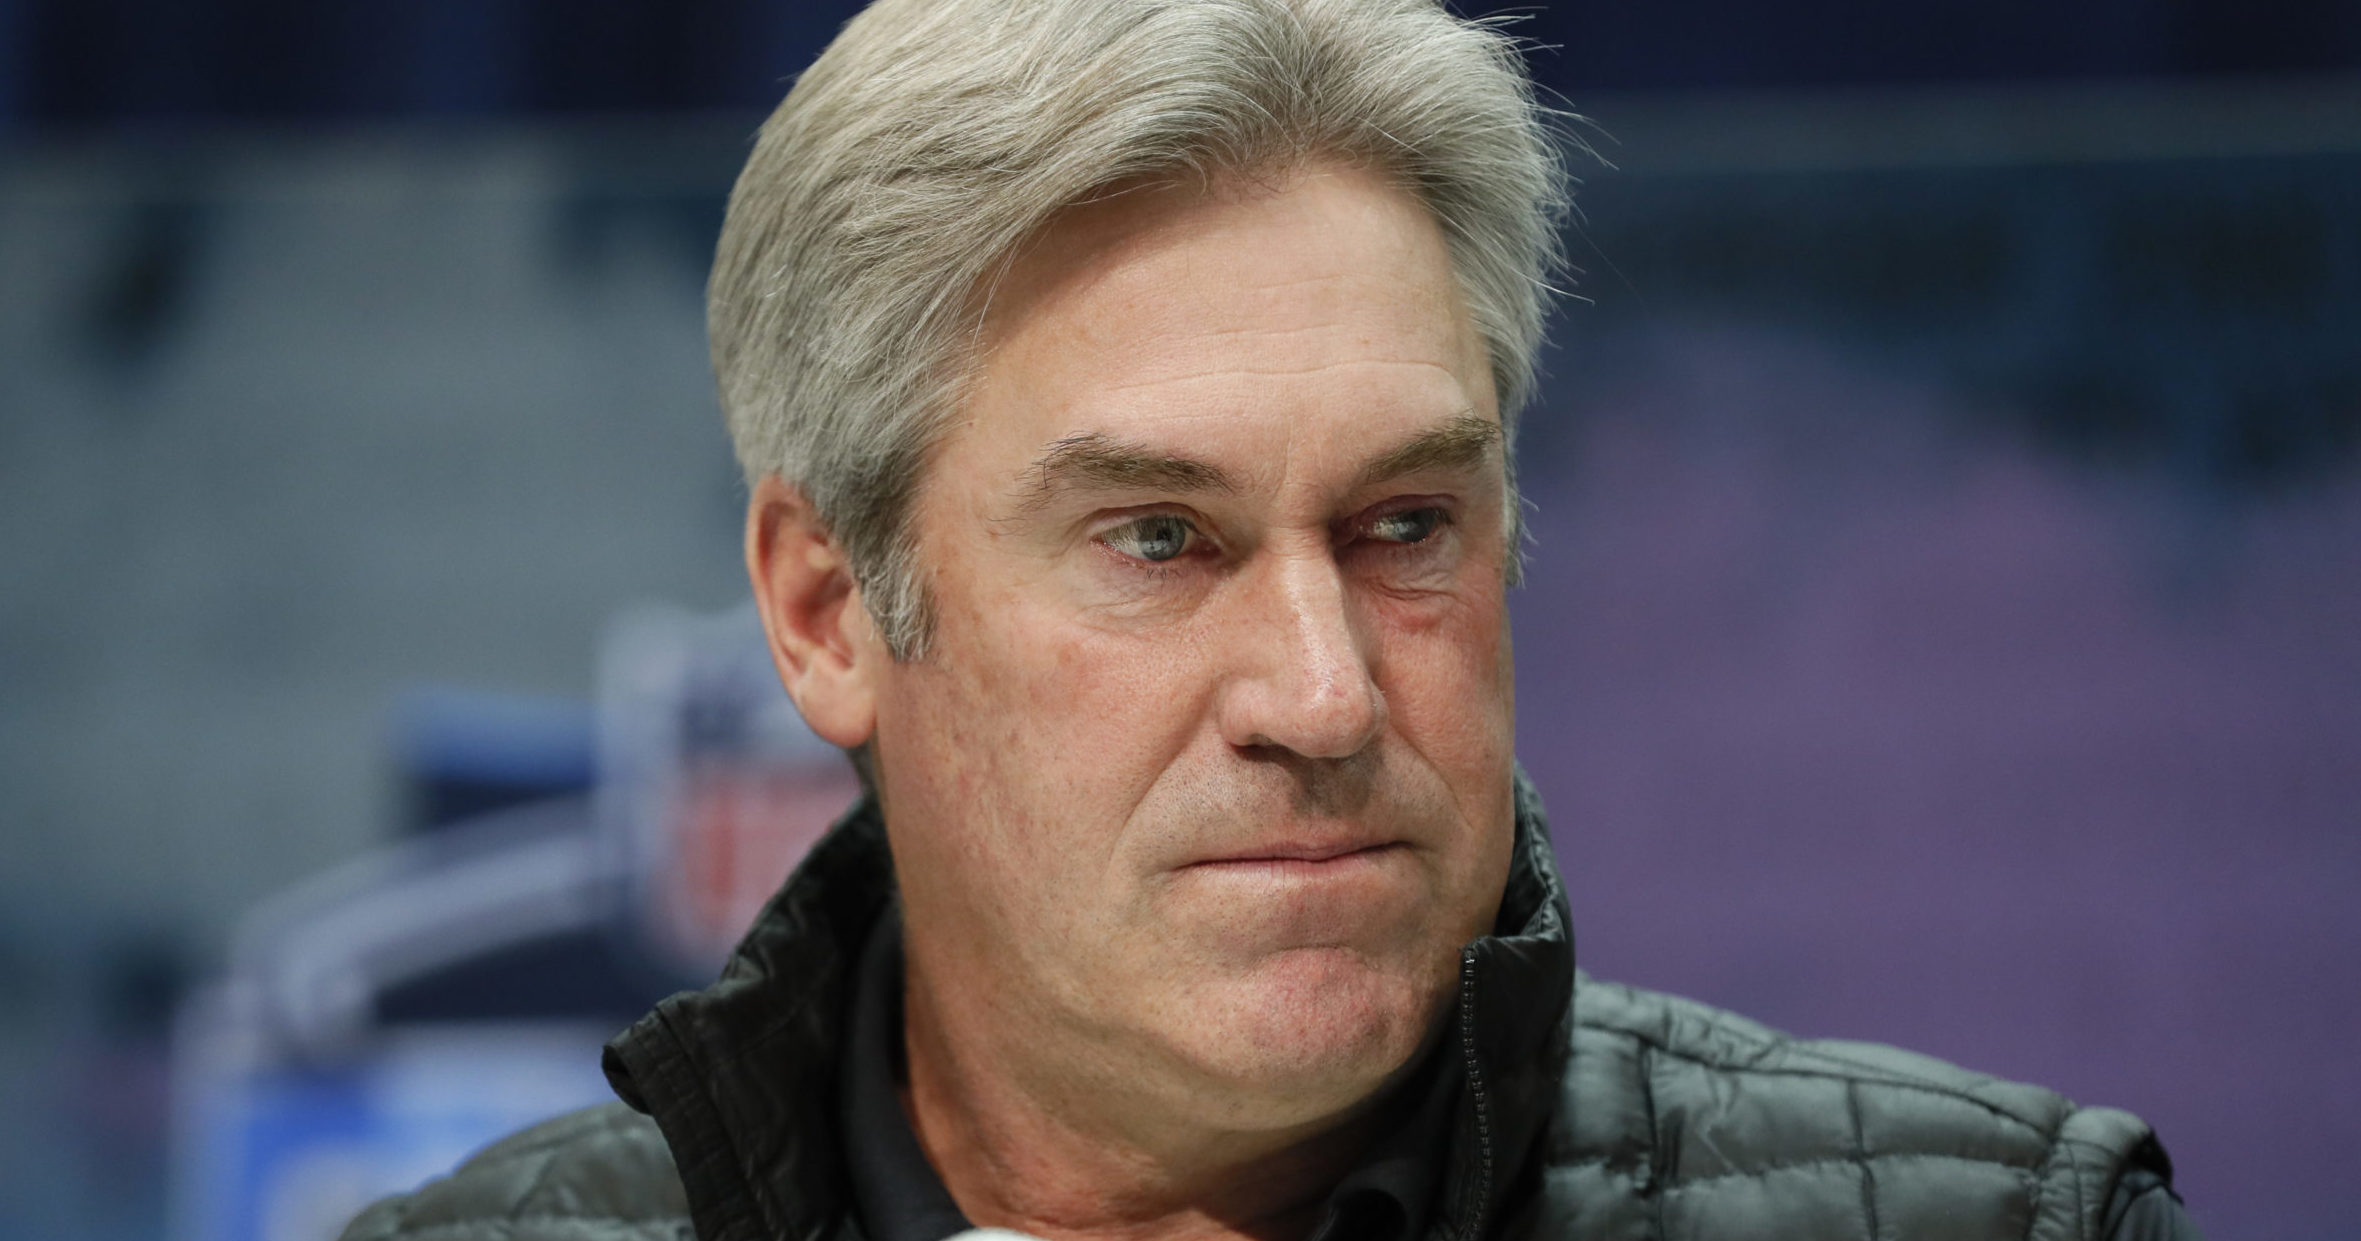 Philadelphia Eagles coach Doug Pederson speaks during a news conference at the NFL scouting combine in Indianapolis on Feb. 25, 2020.